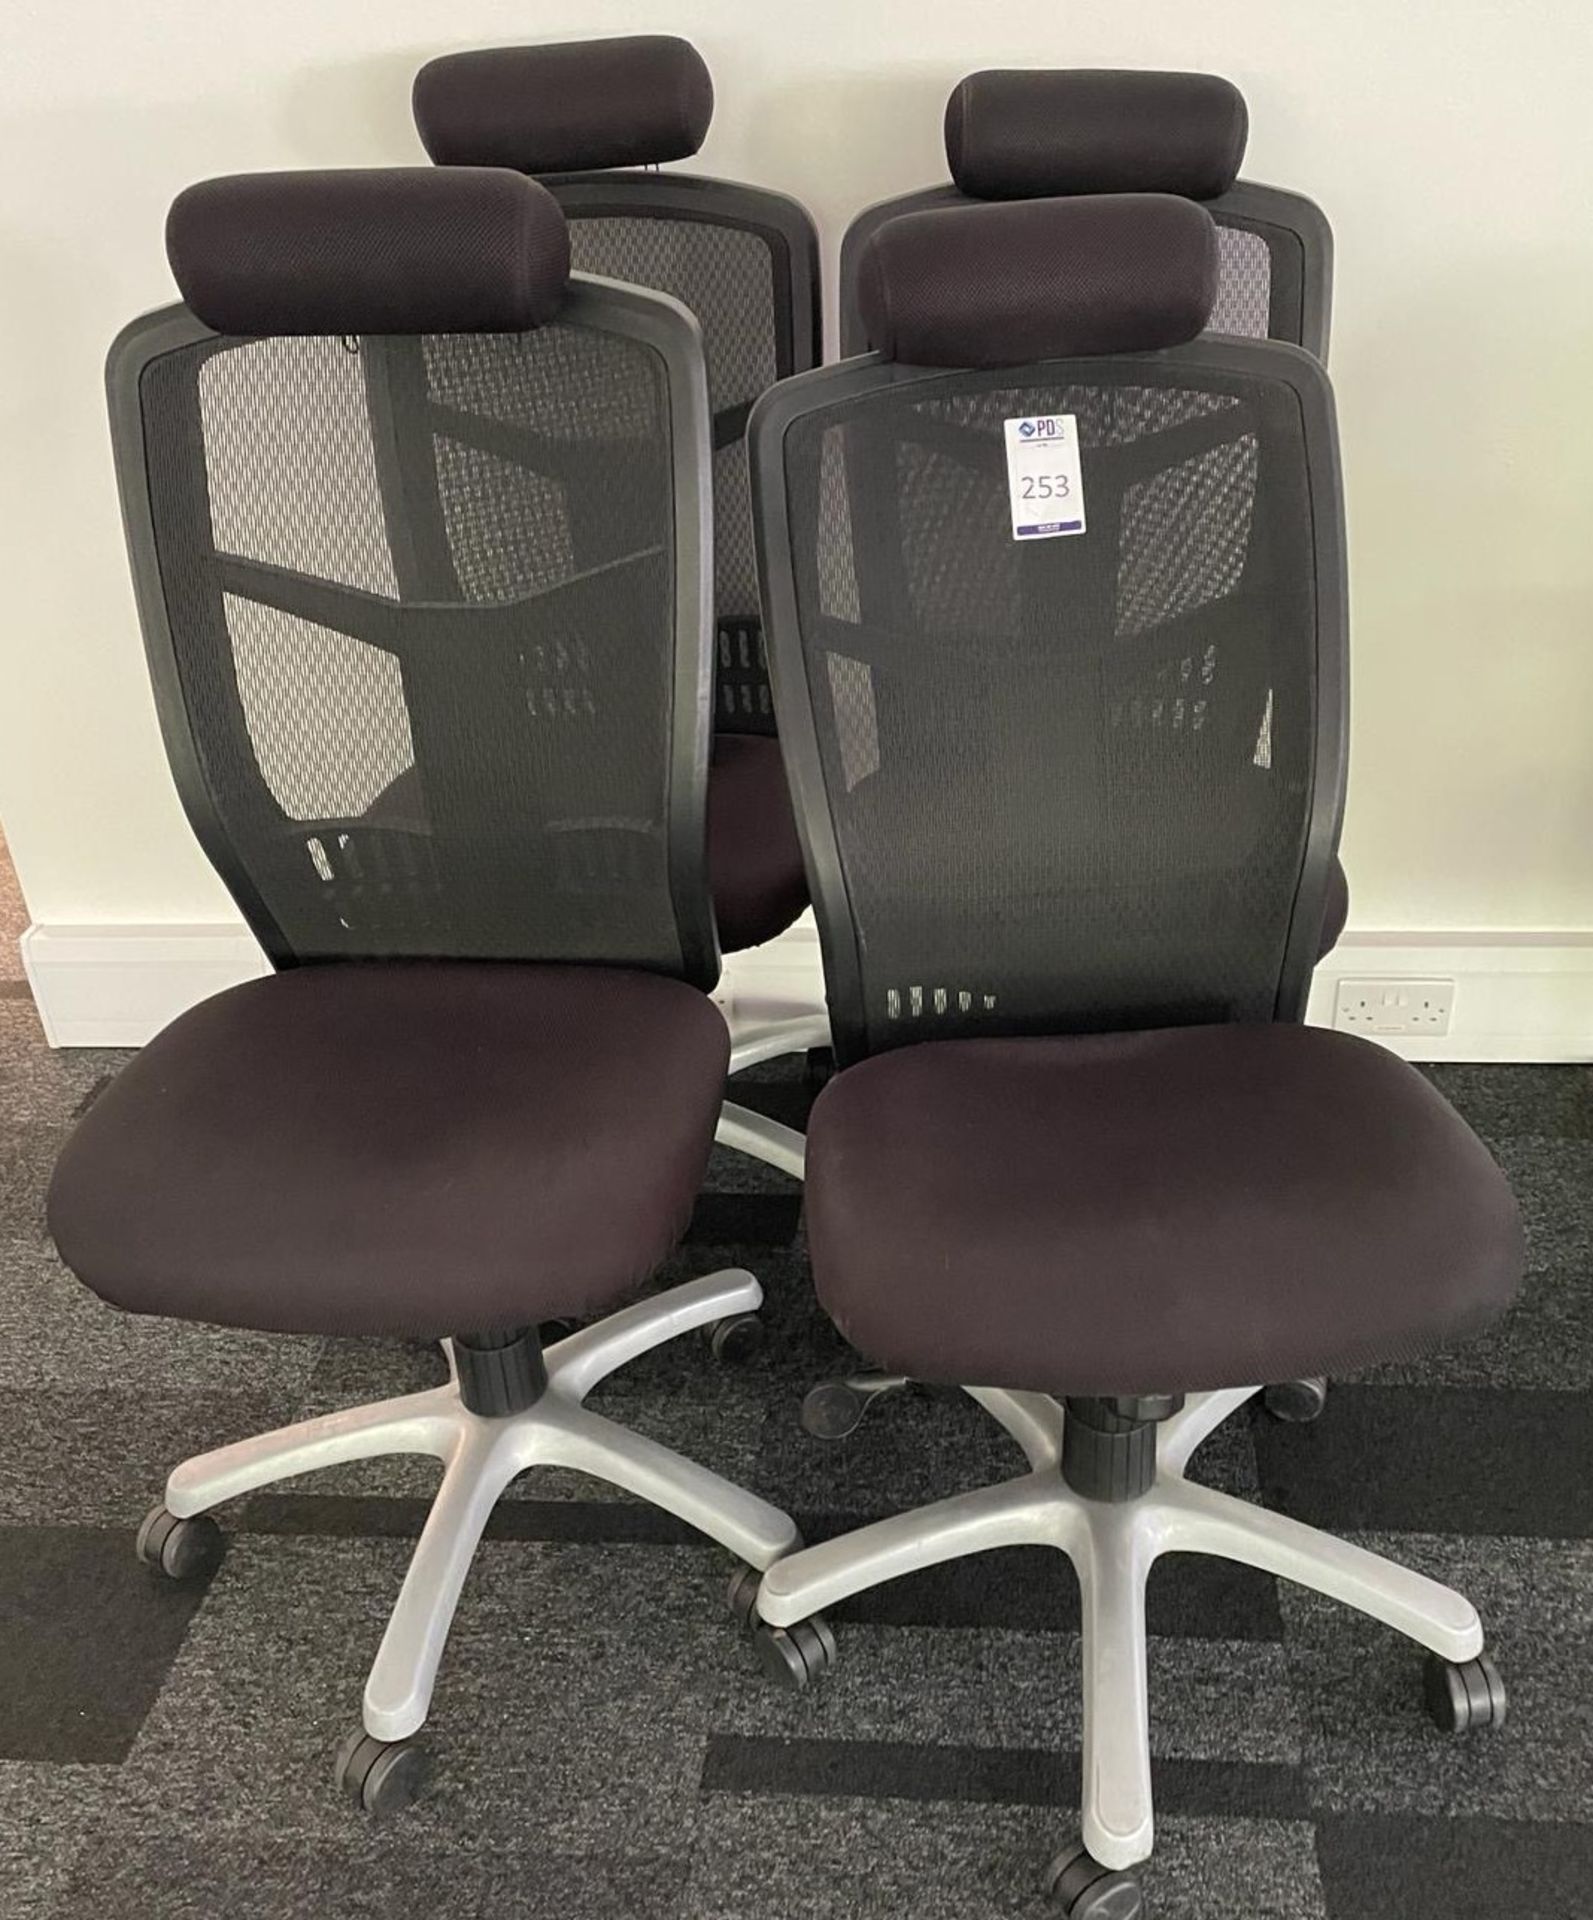 Four Black Upholstered Operators Chairs (Located Rugby. Please Refer to General Notes)